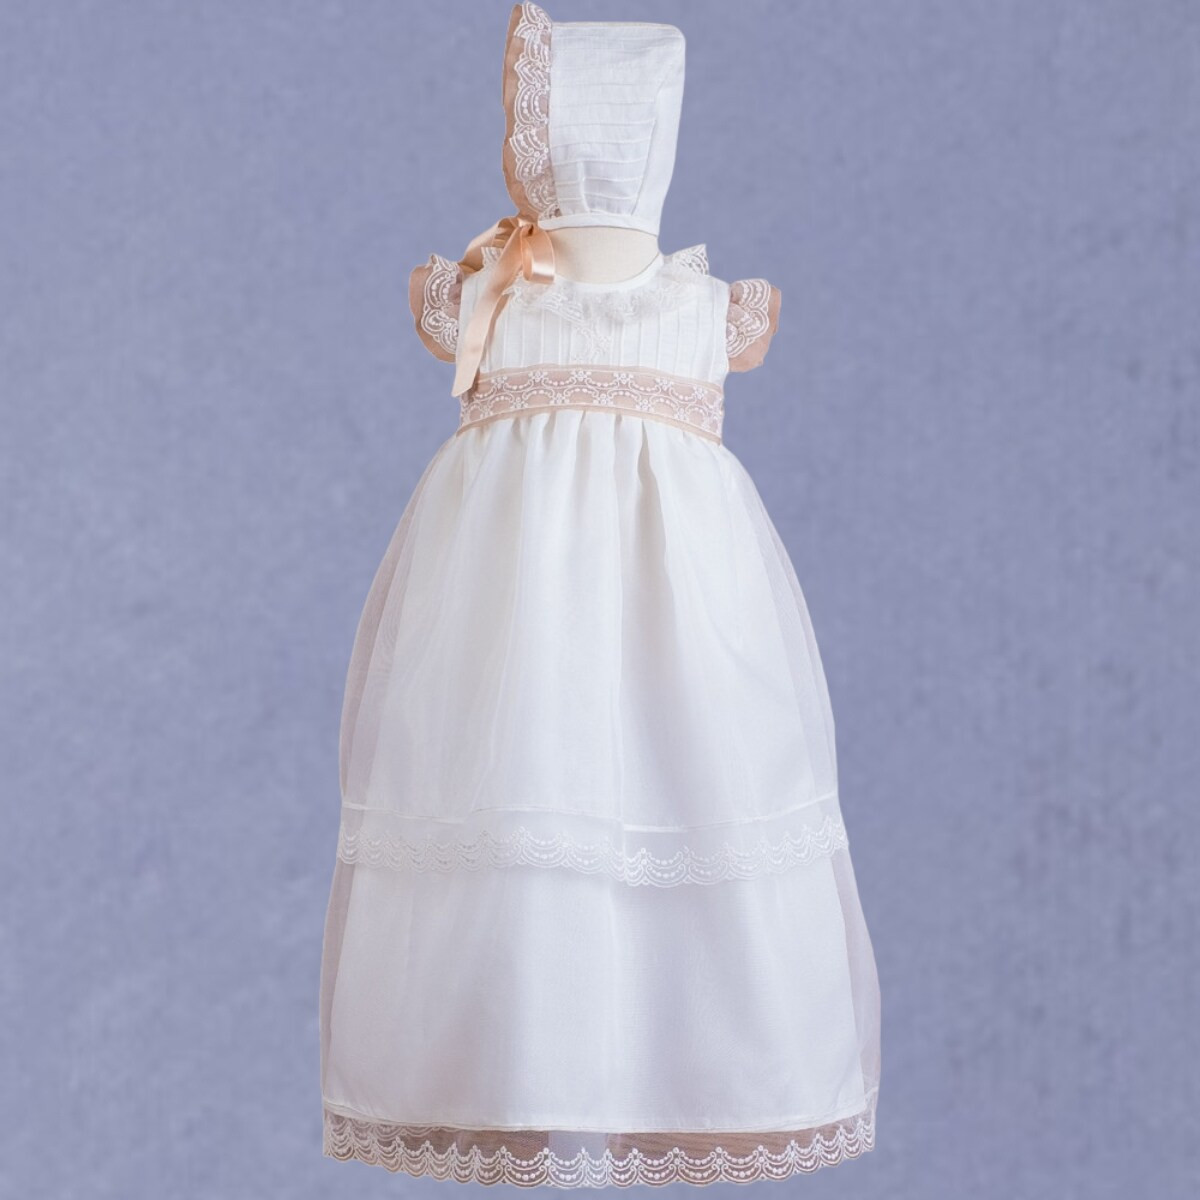 girls christening gown with lace MISHA BABY - 1